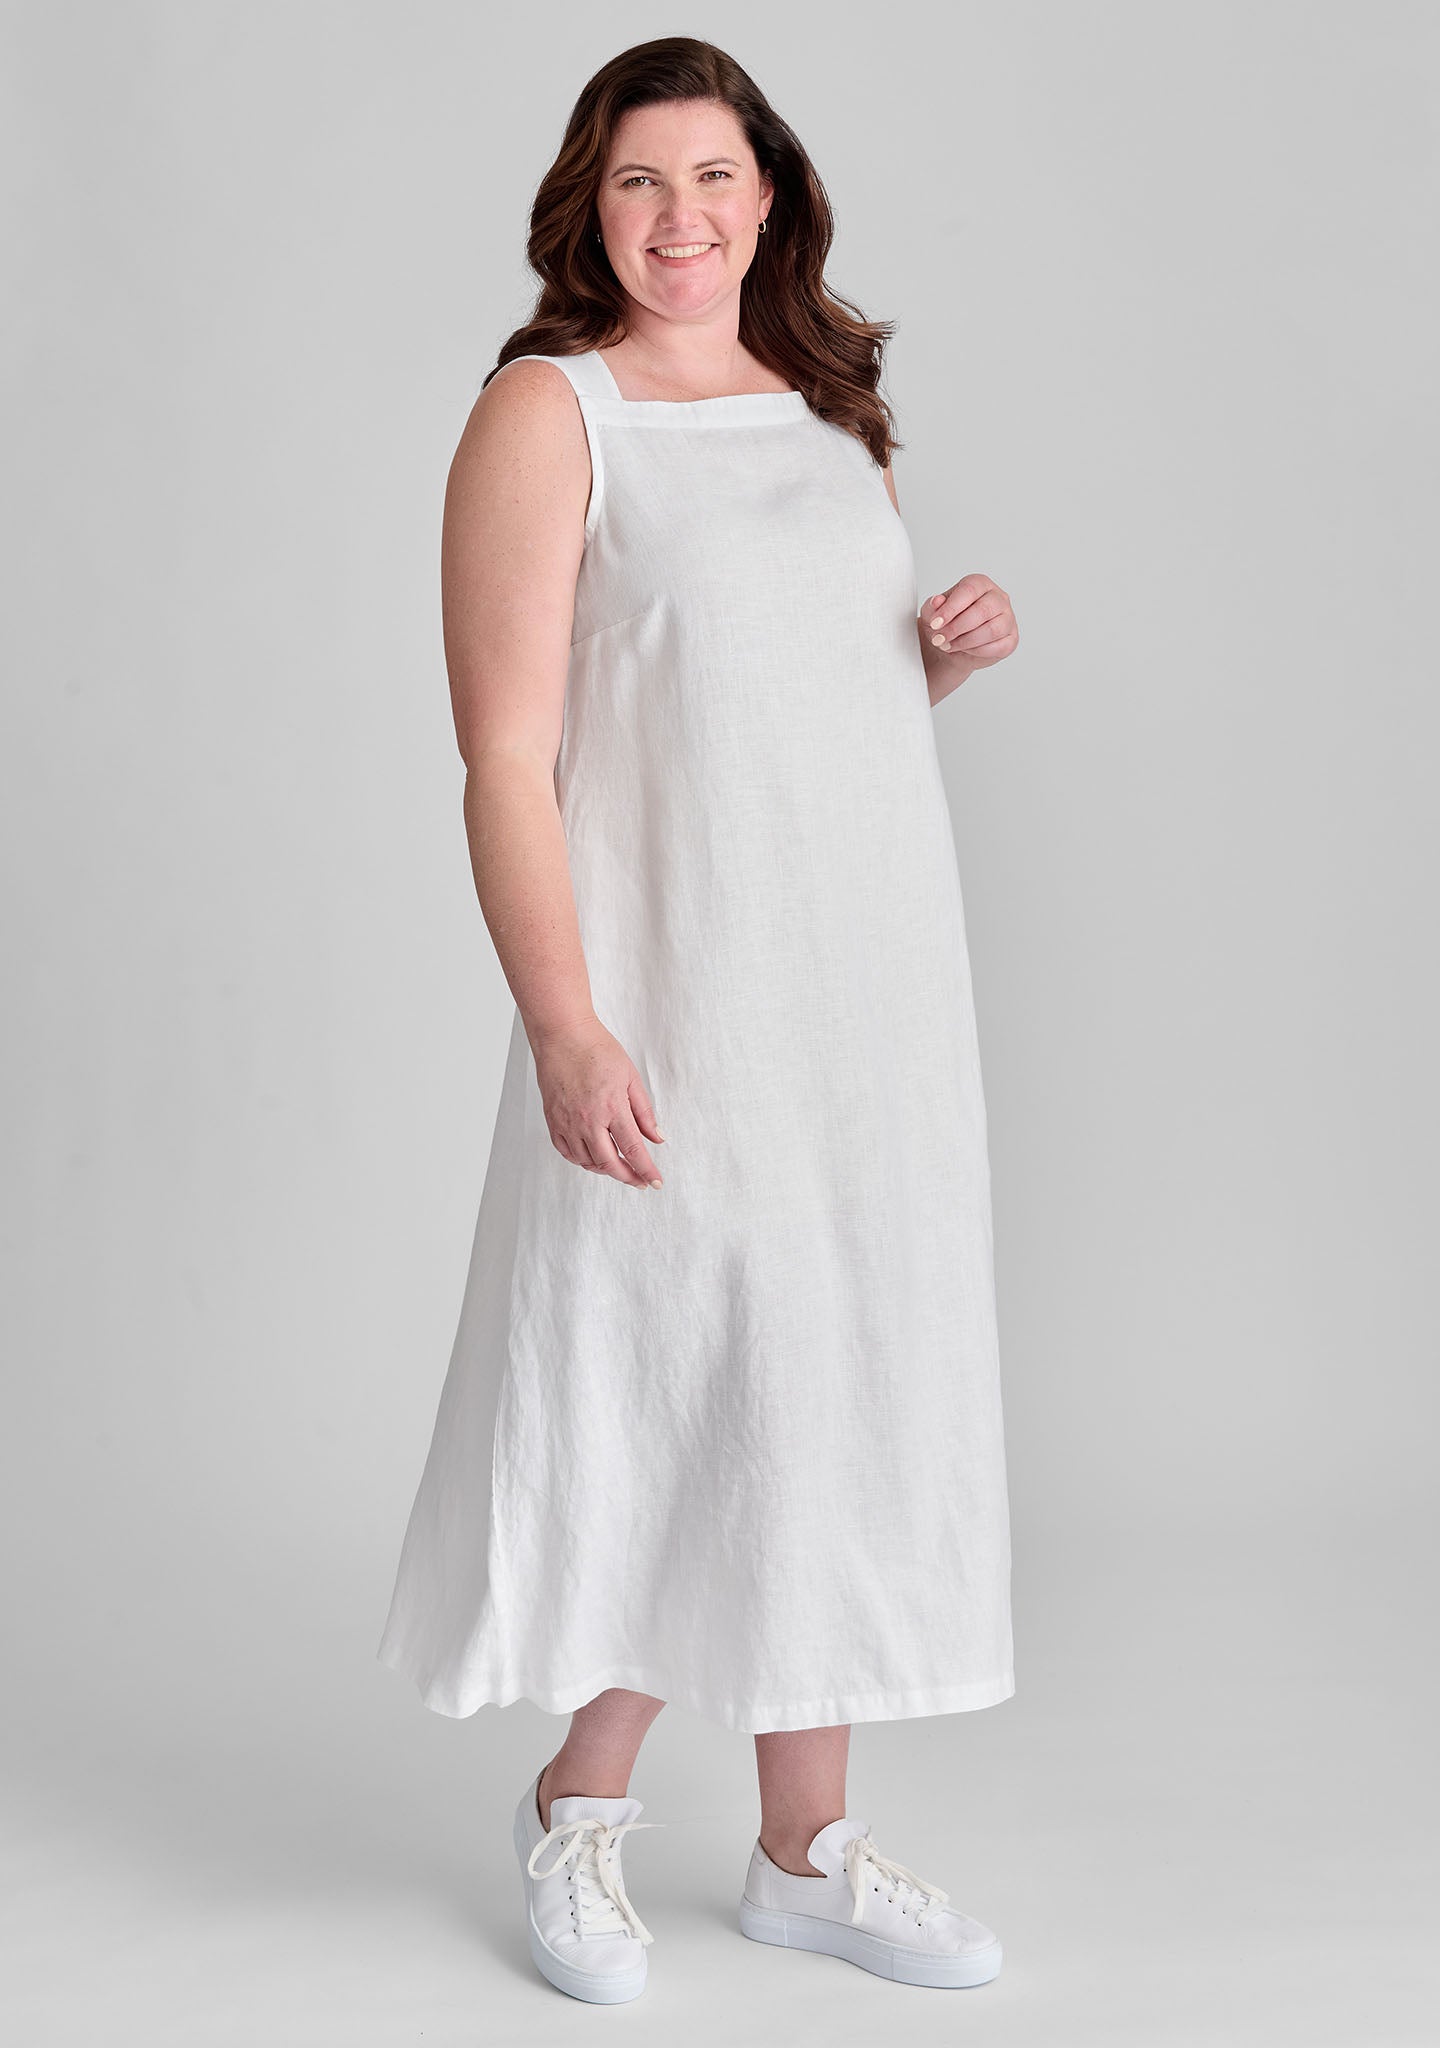 FLAX linen dress in white